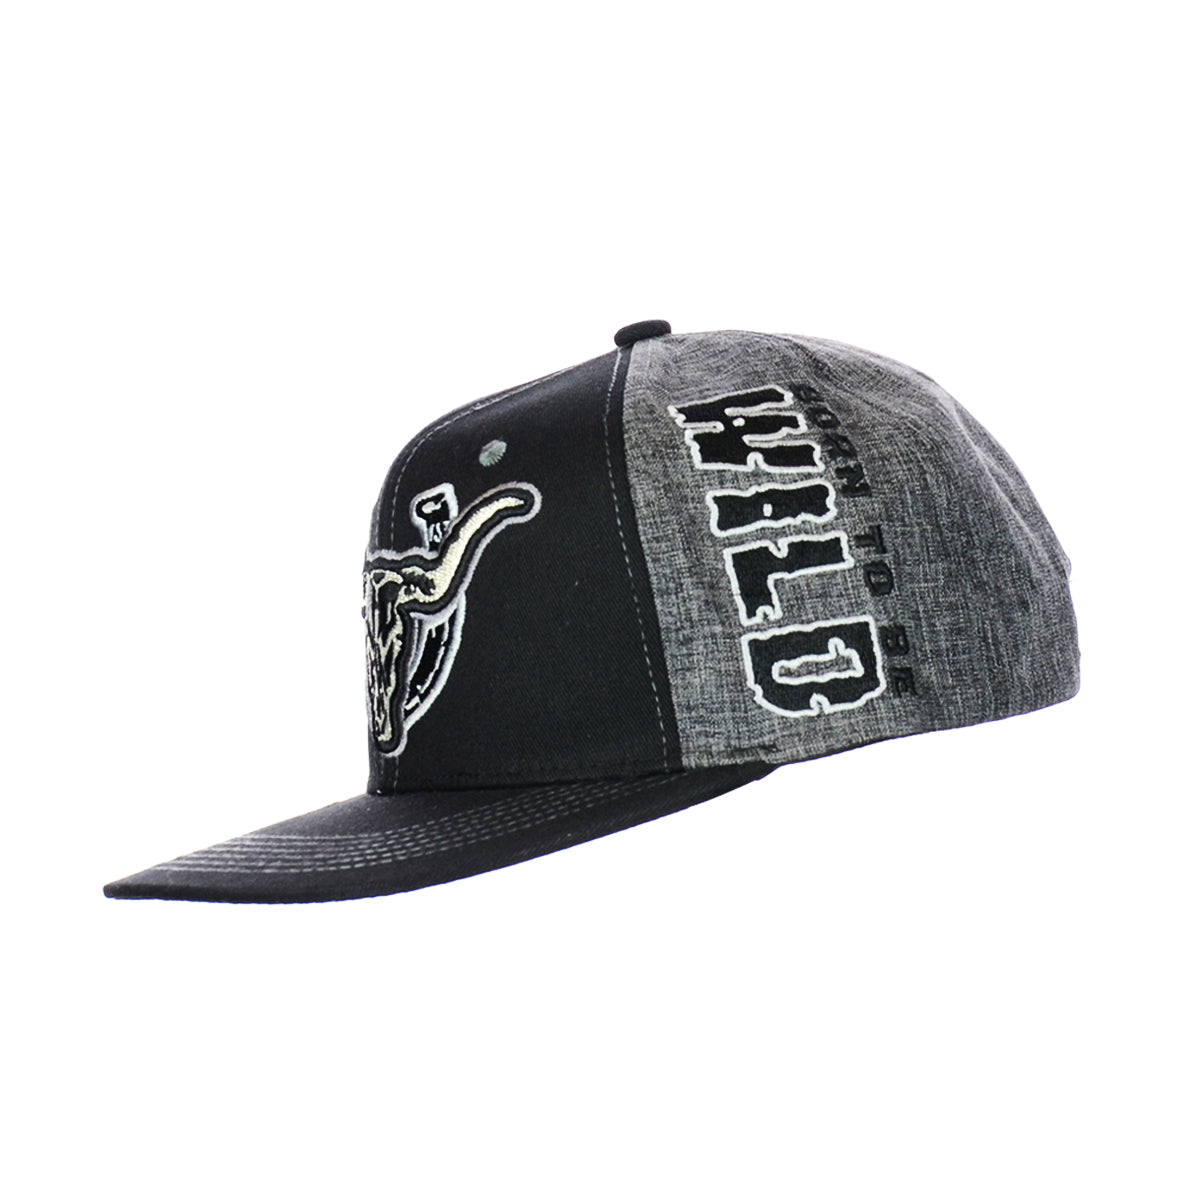 Snapback "WILD BULL" Hat Embroidered